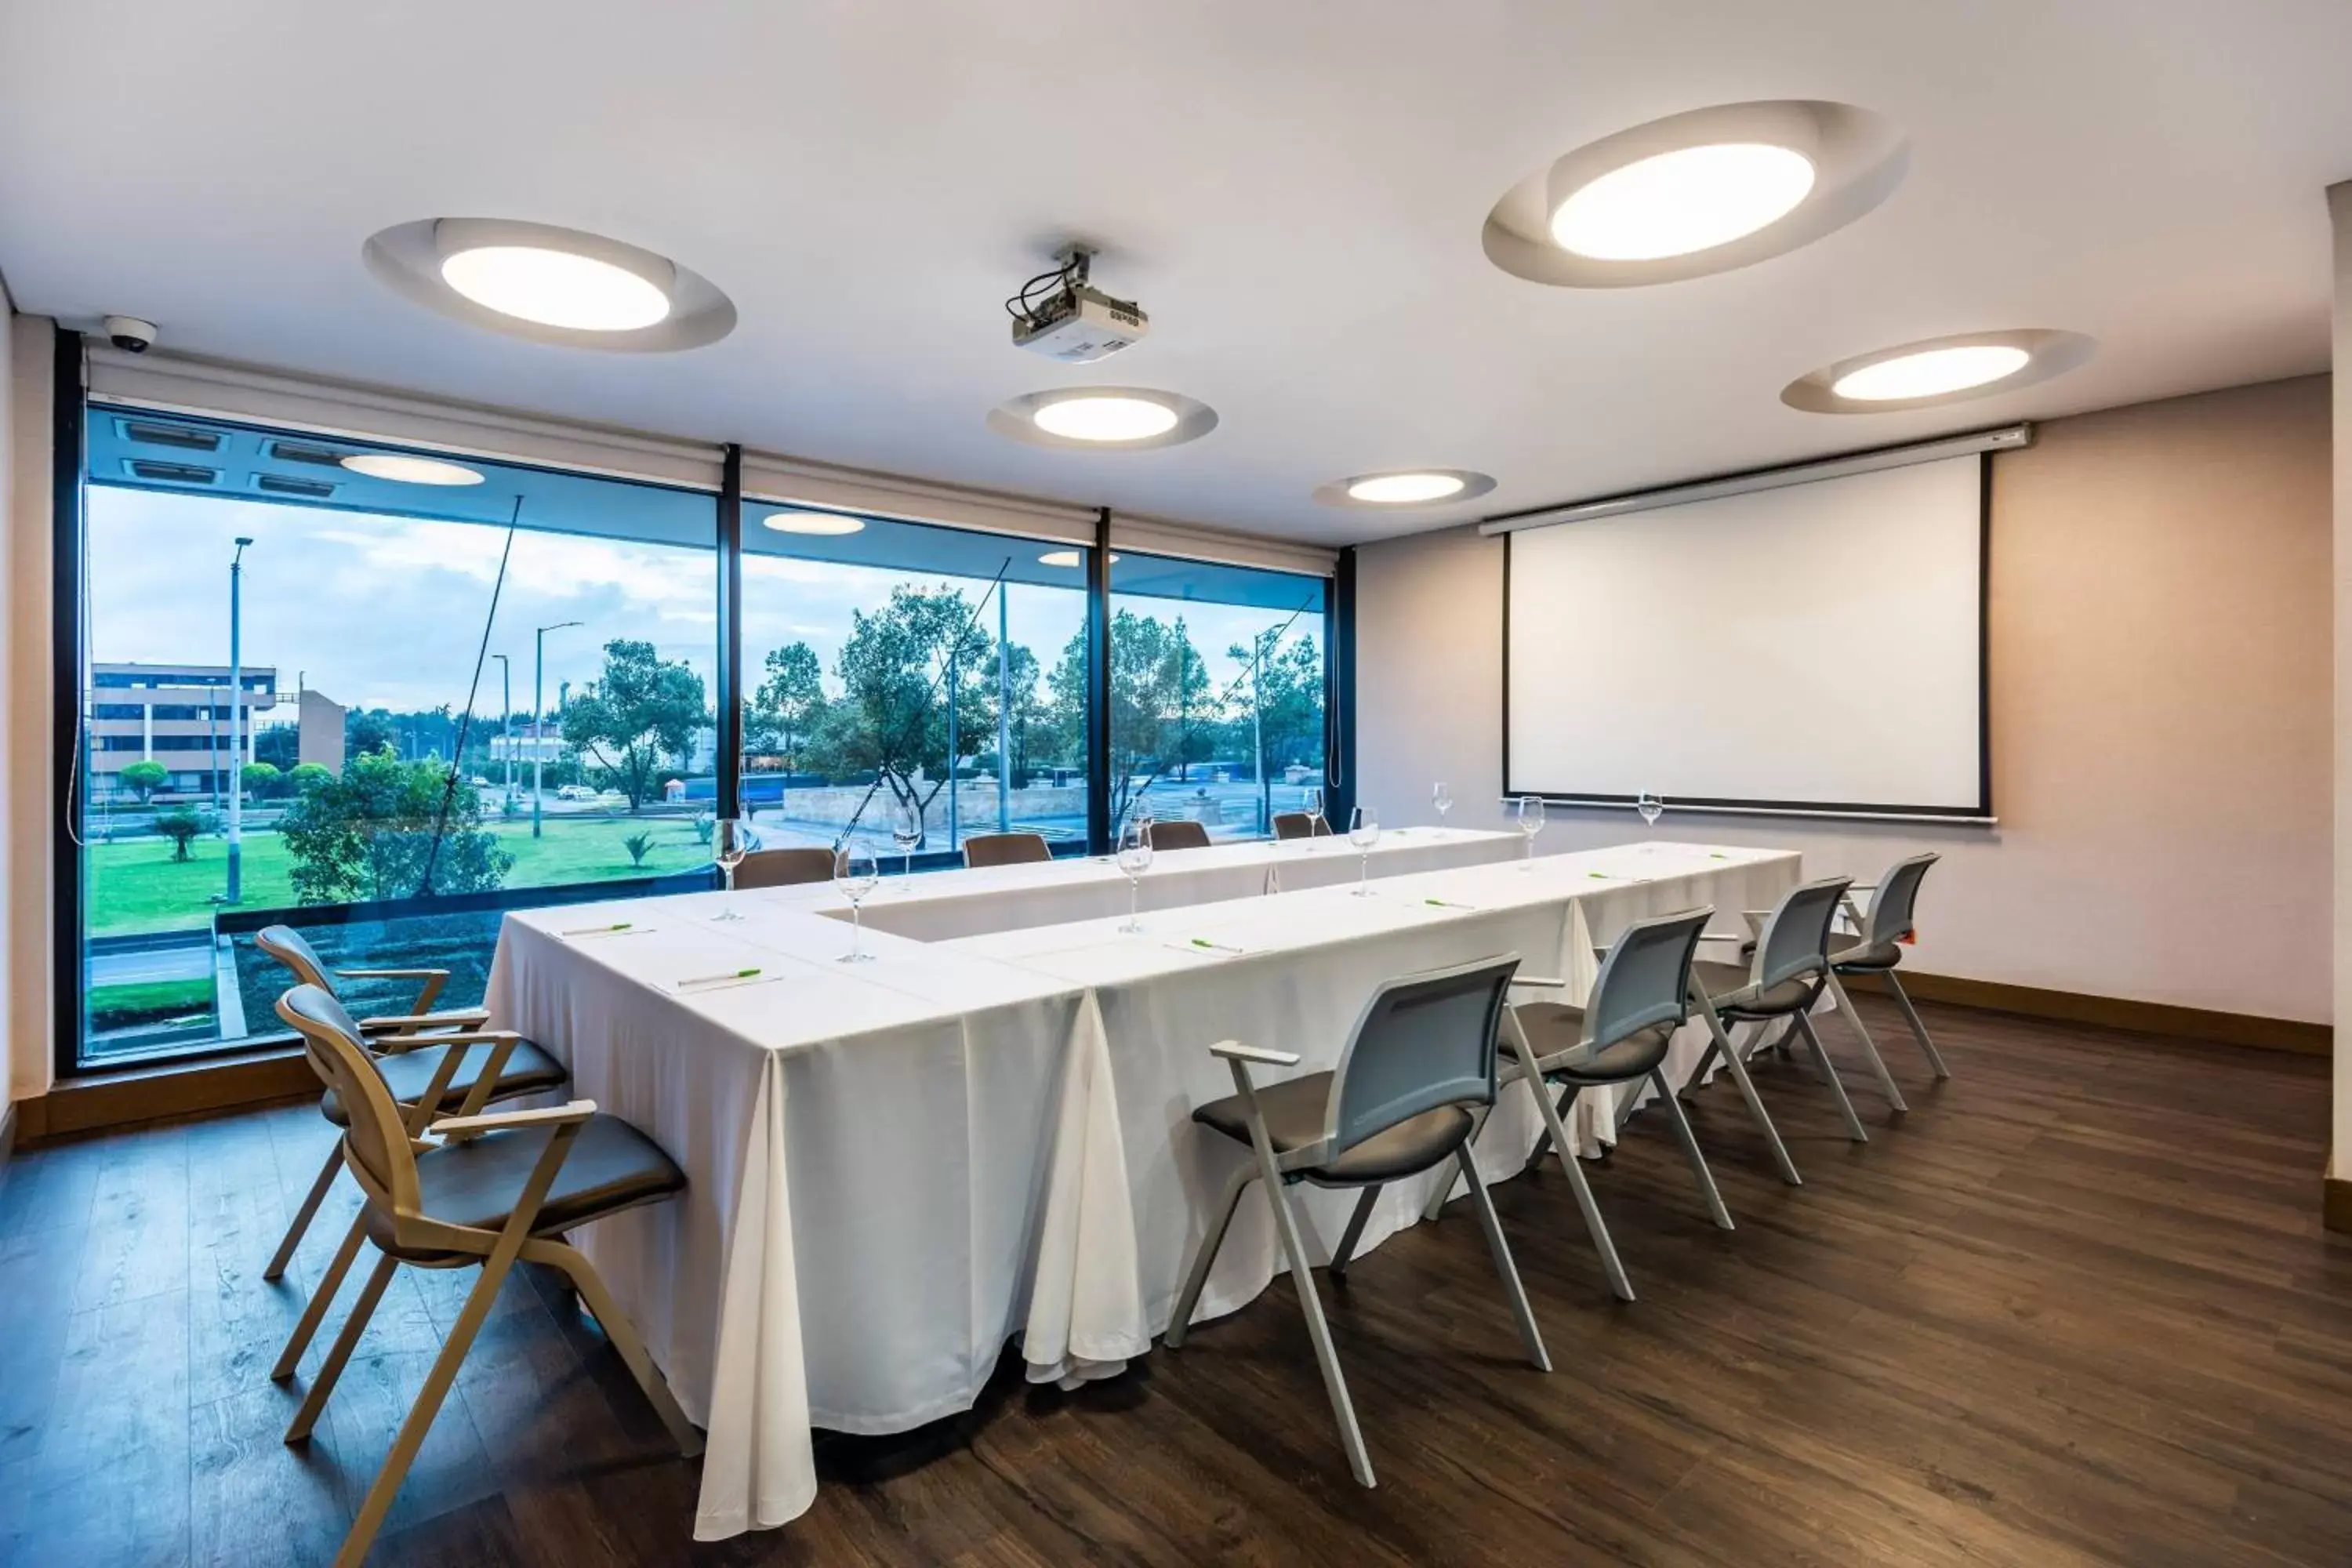 Meeting/conference room in Courtyard by Marriott Bogota Airport